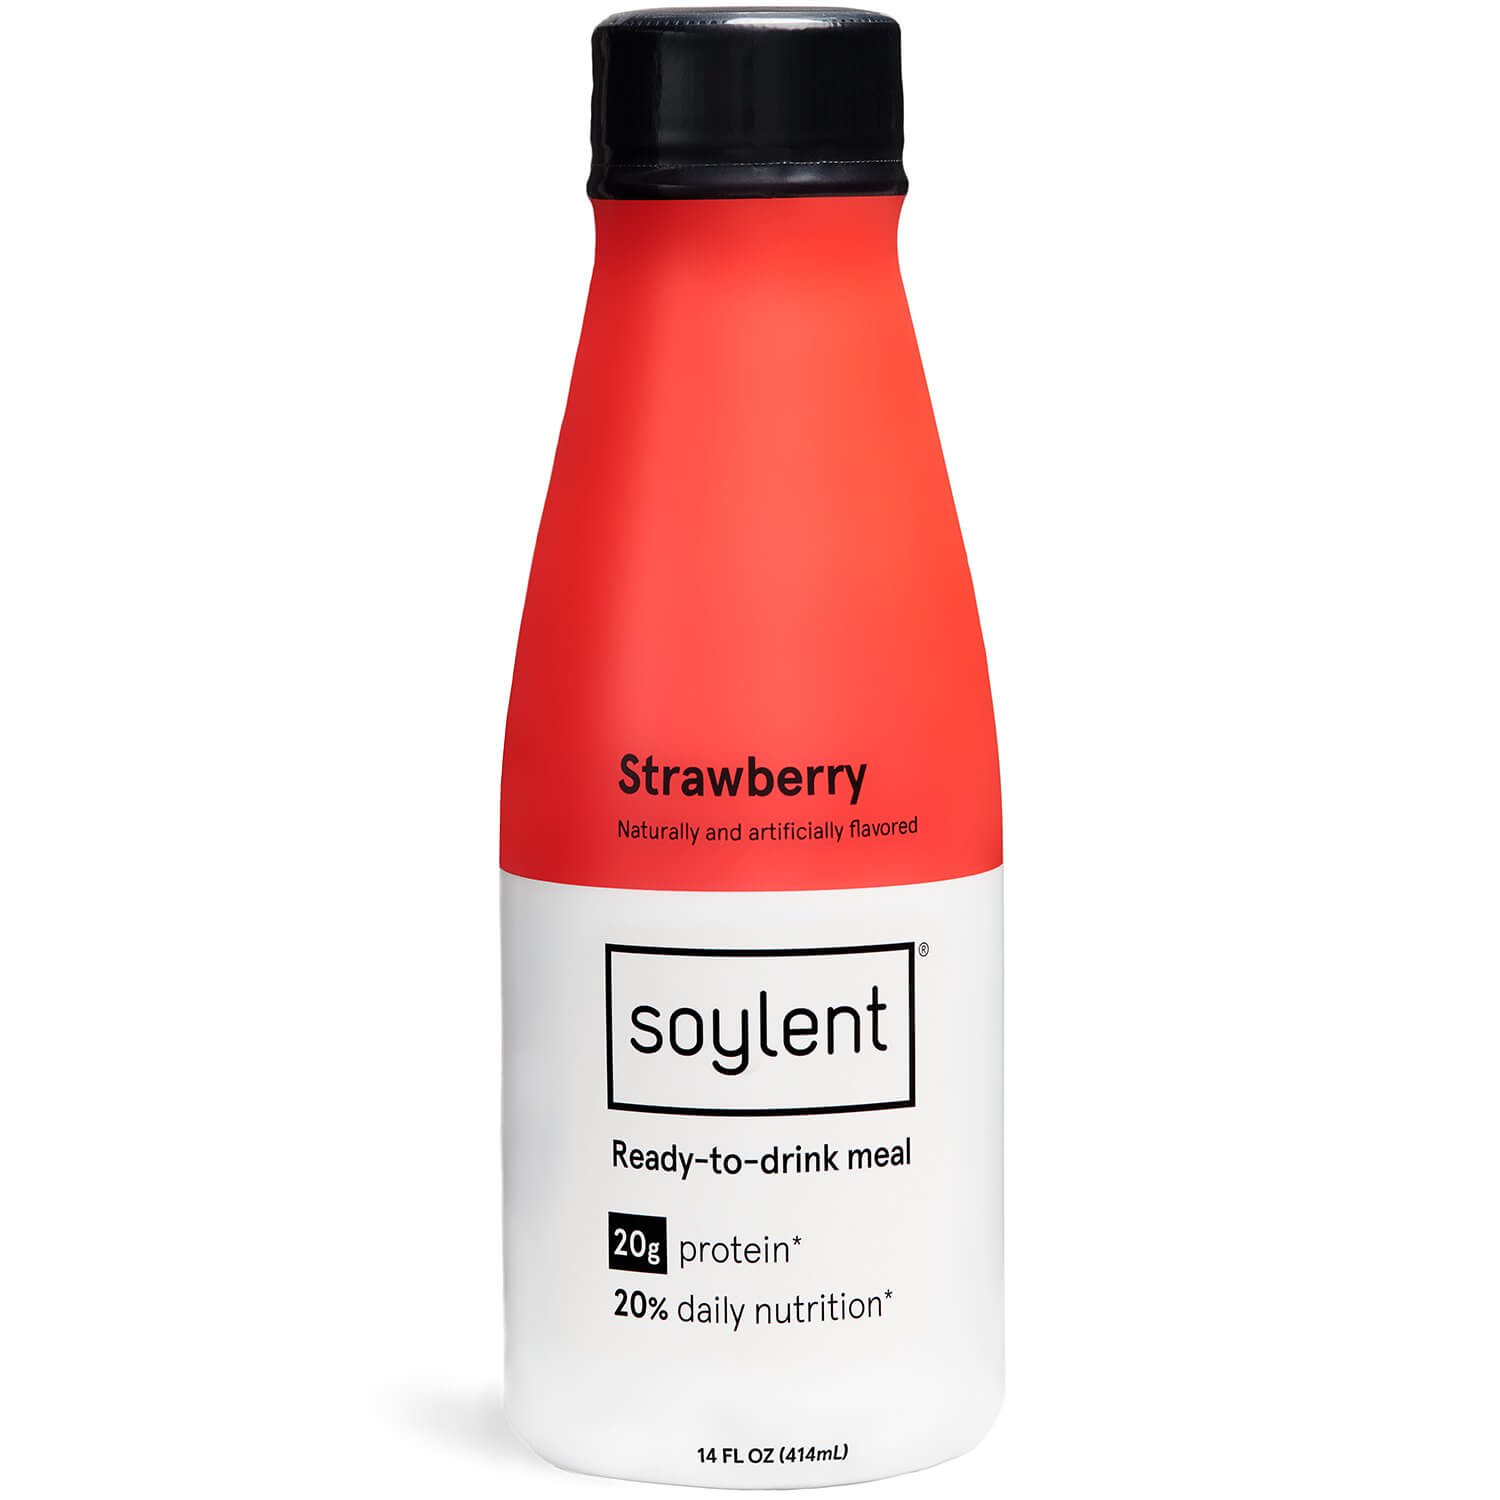 Soylent Strawberry Plant Protein Meal Replacement Shake Review